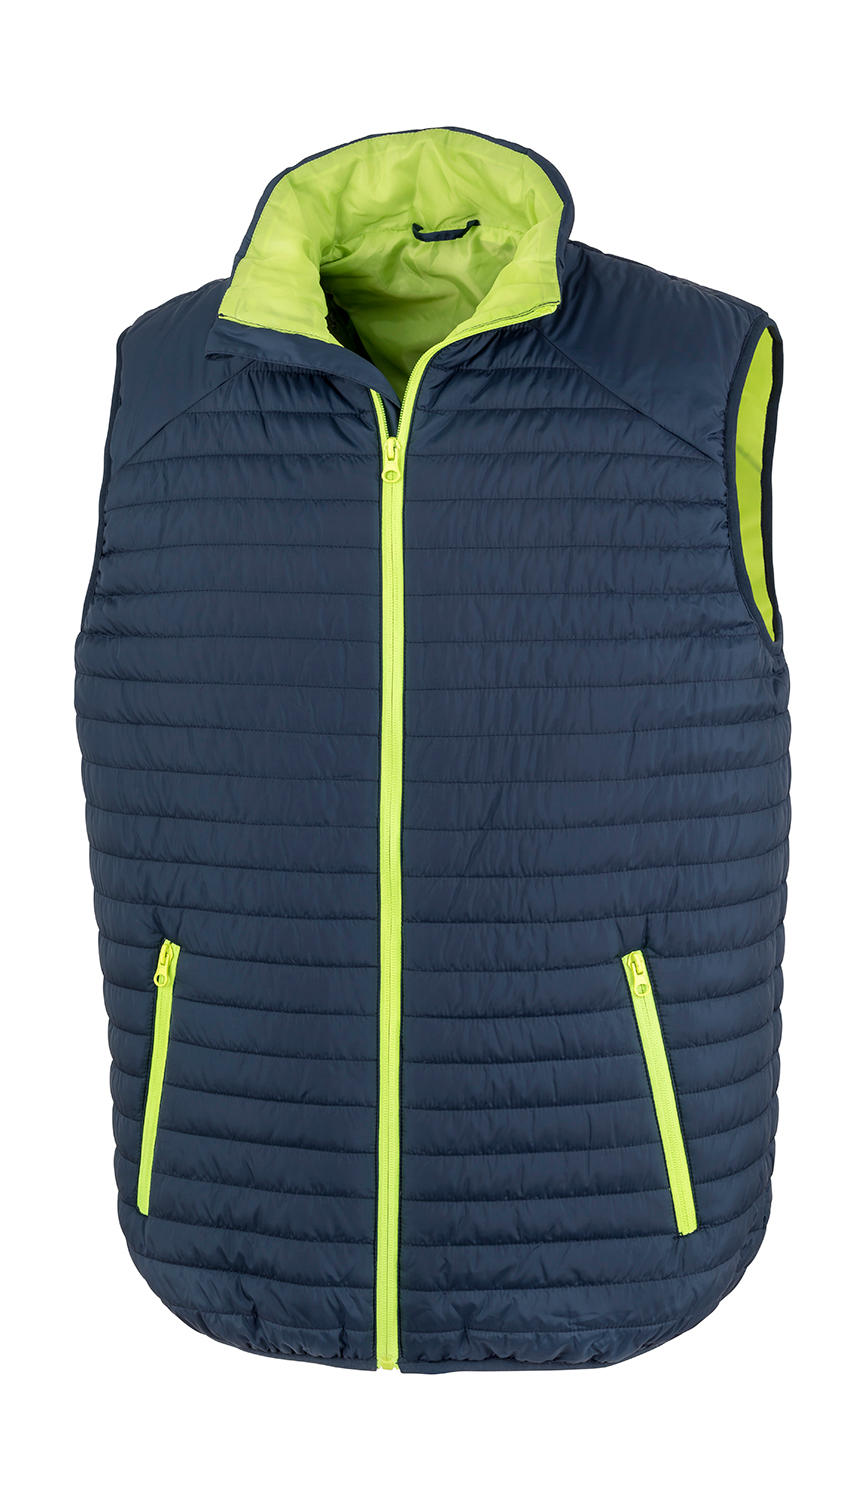 Vesta Thermoquilt Gilet - navy/lime